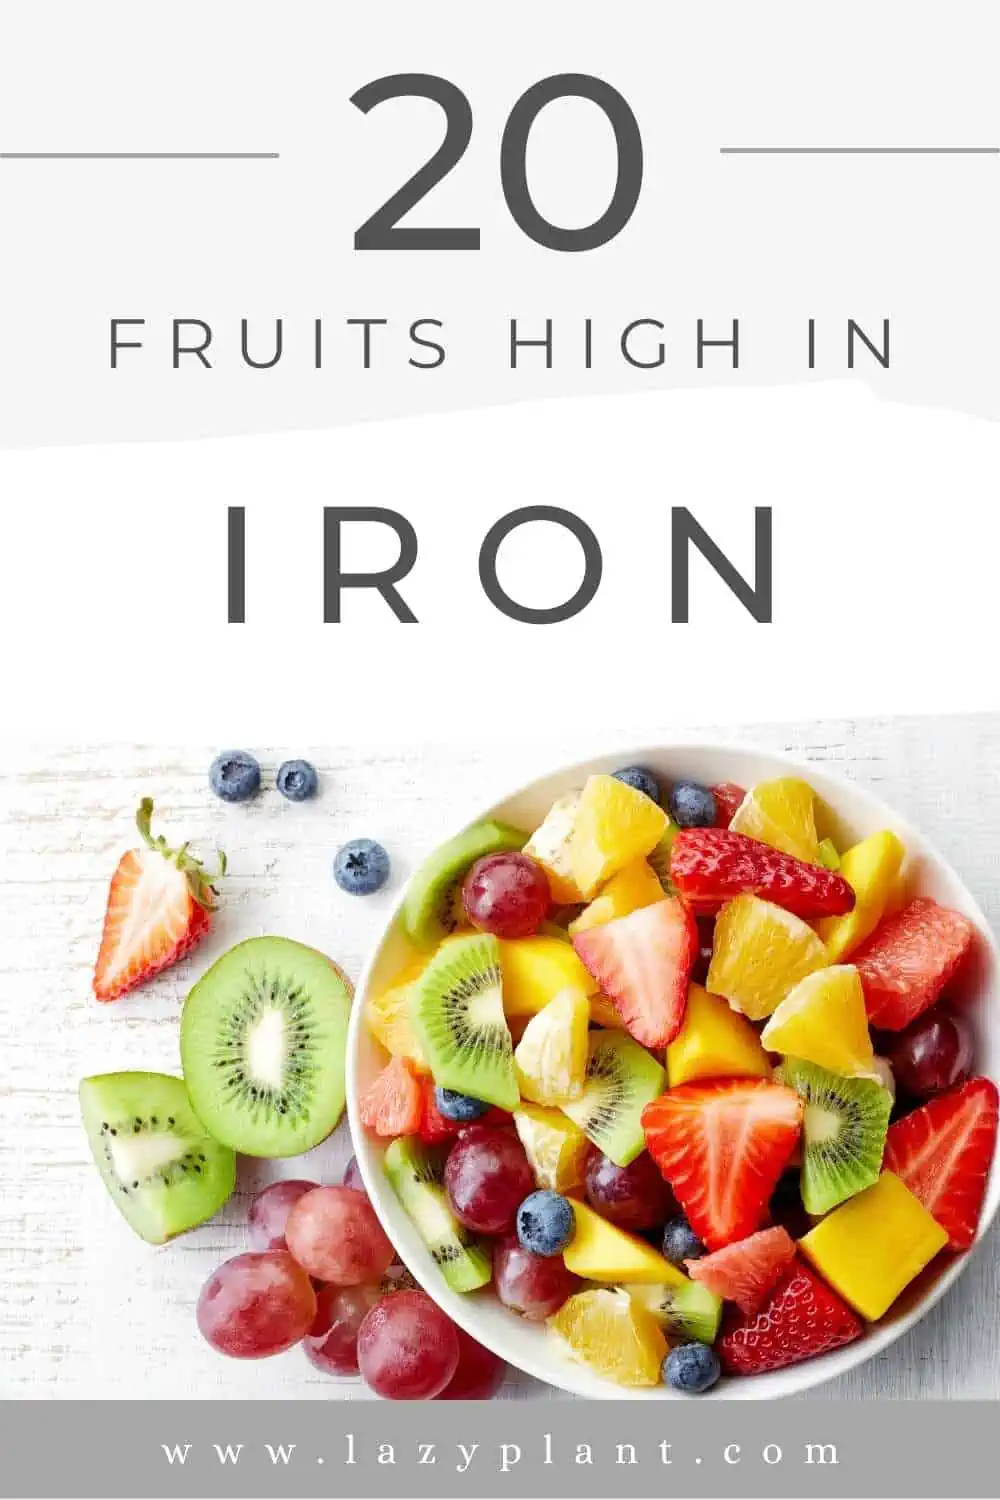 A list of common fruits high in iron.